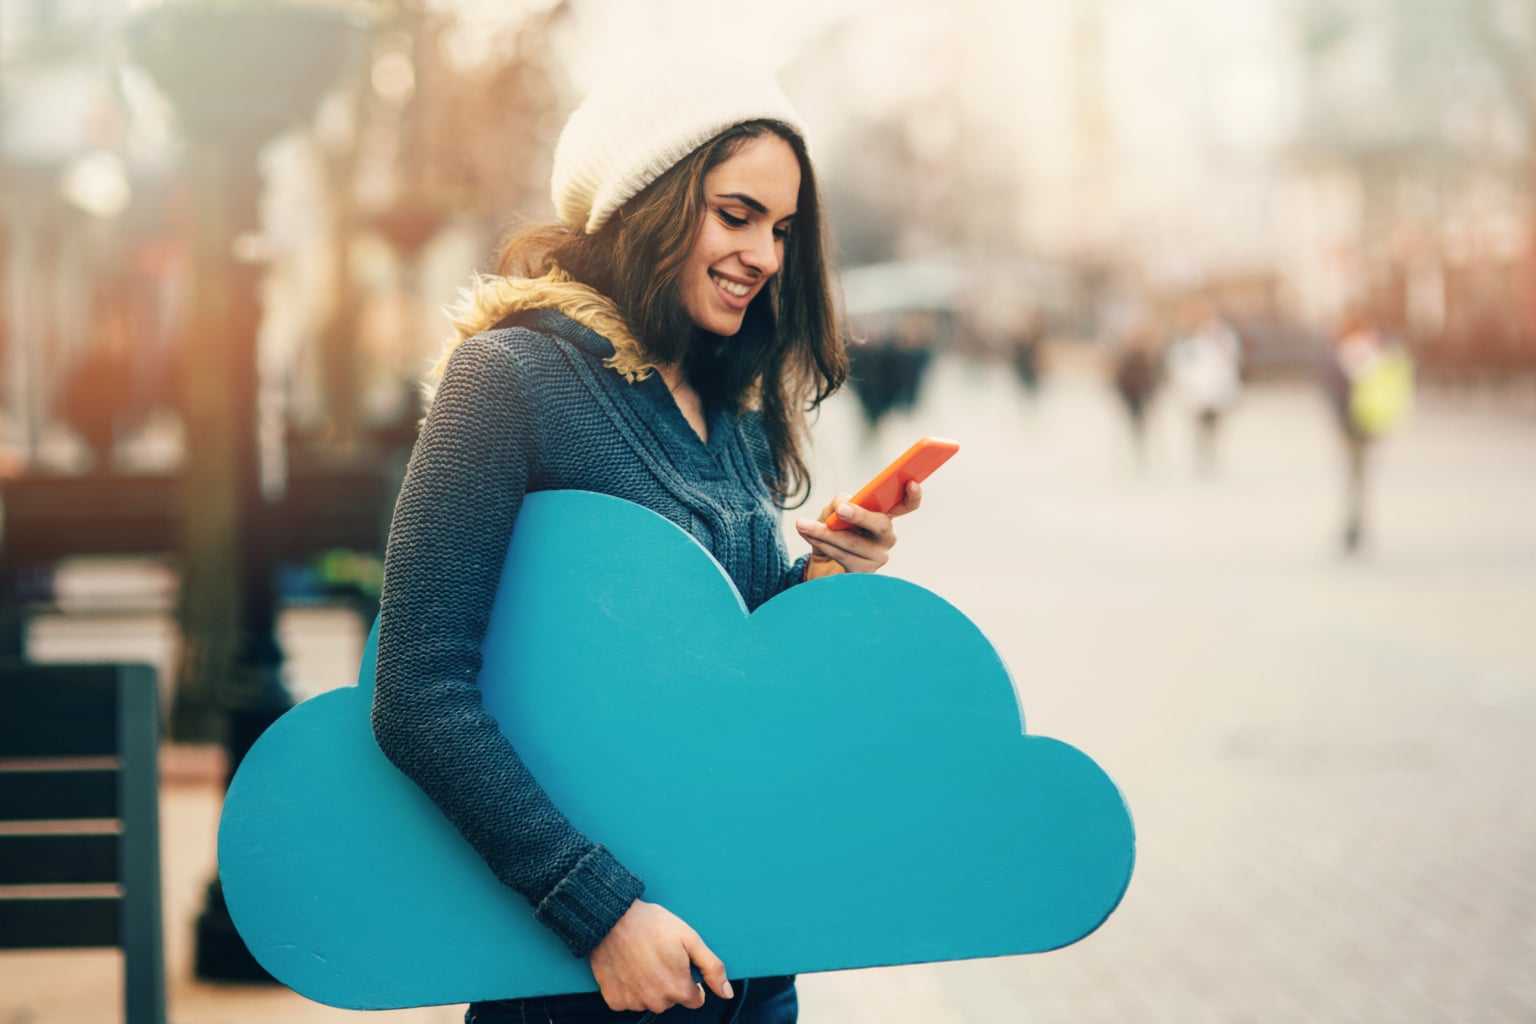 The messaging in the cloud concept